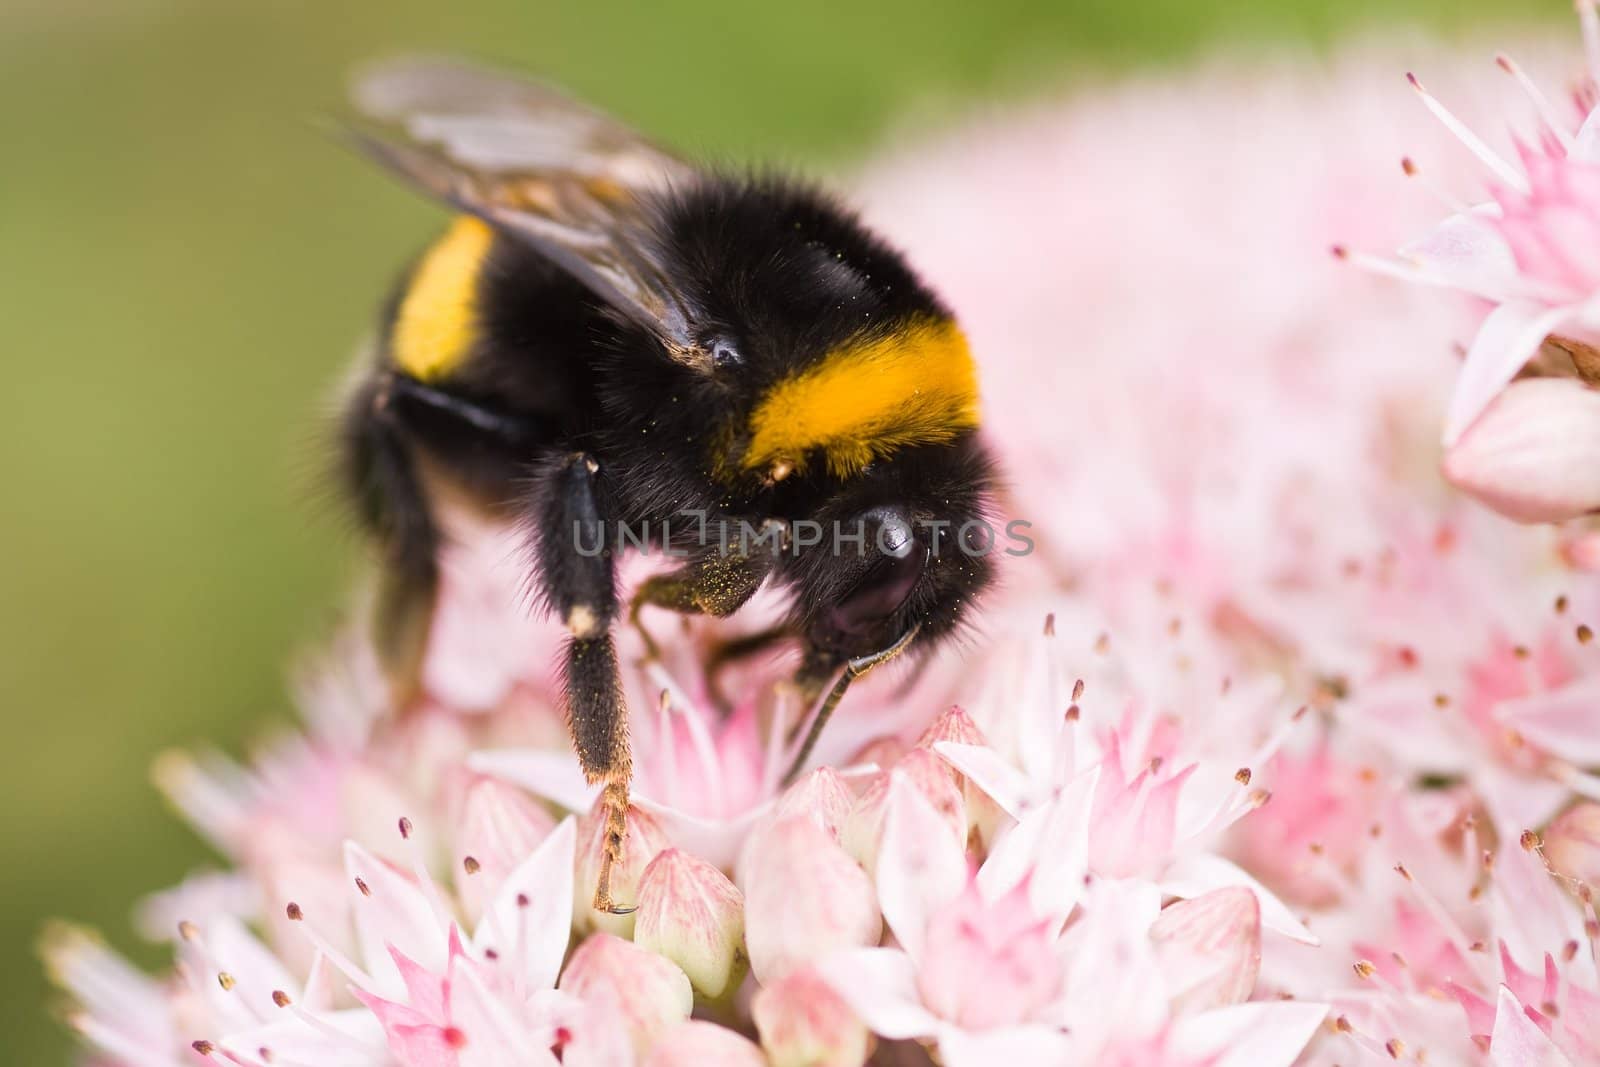 Bumble bee by Colette